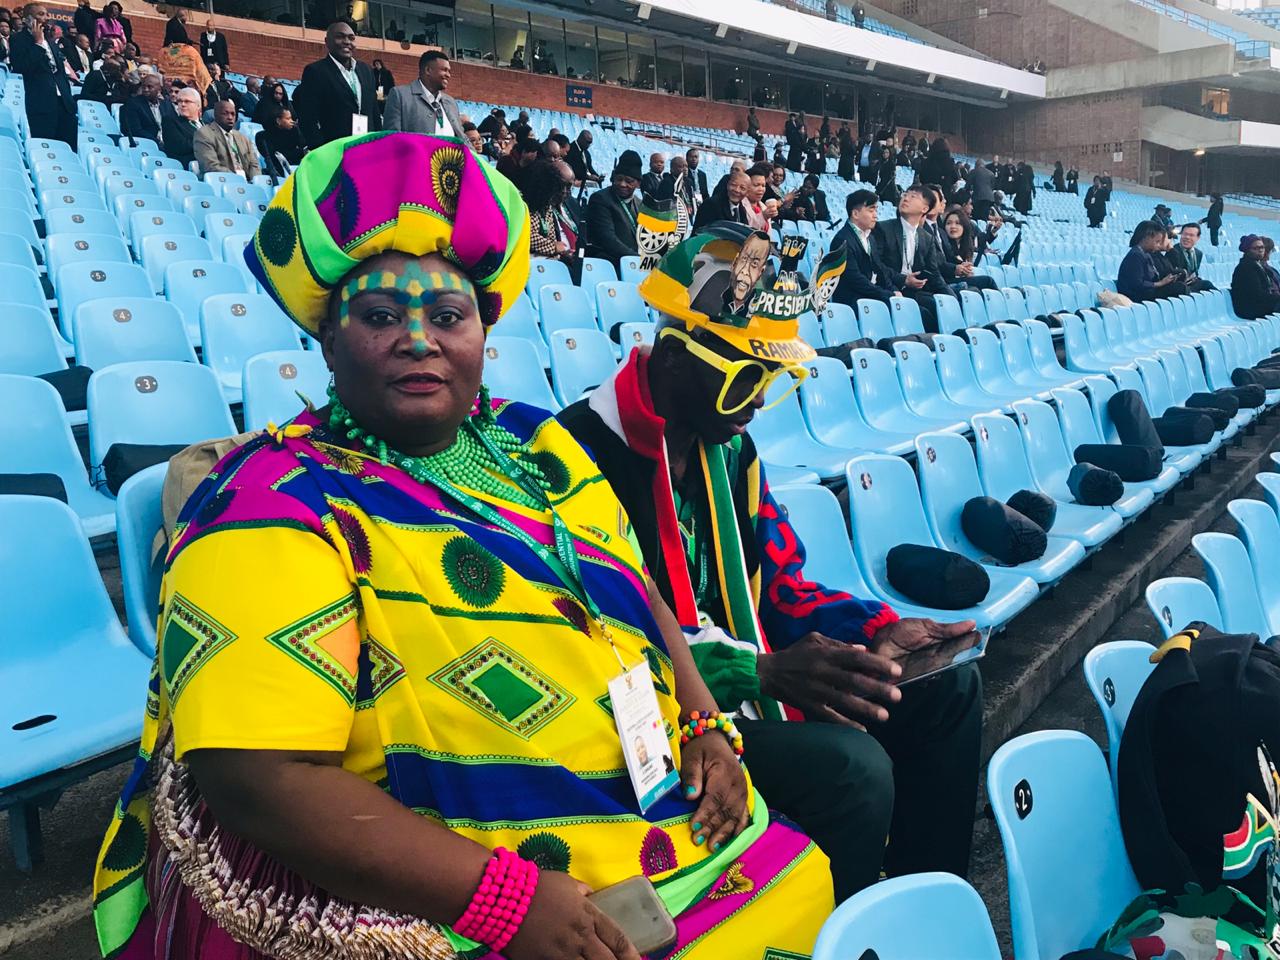 Sports enthusiasts Mama Joy Chauke was one of the dignitaries at the Presidential Inauguration.